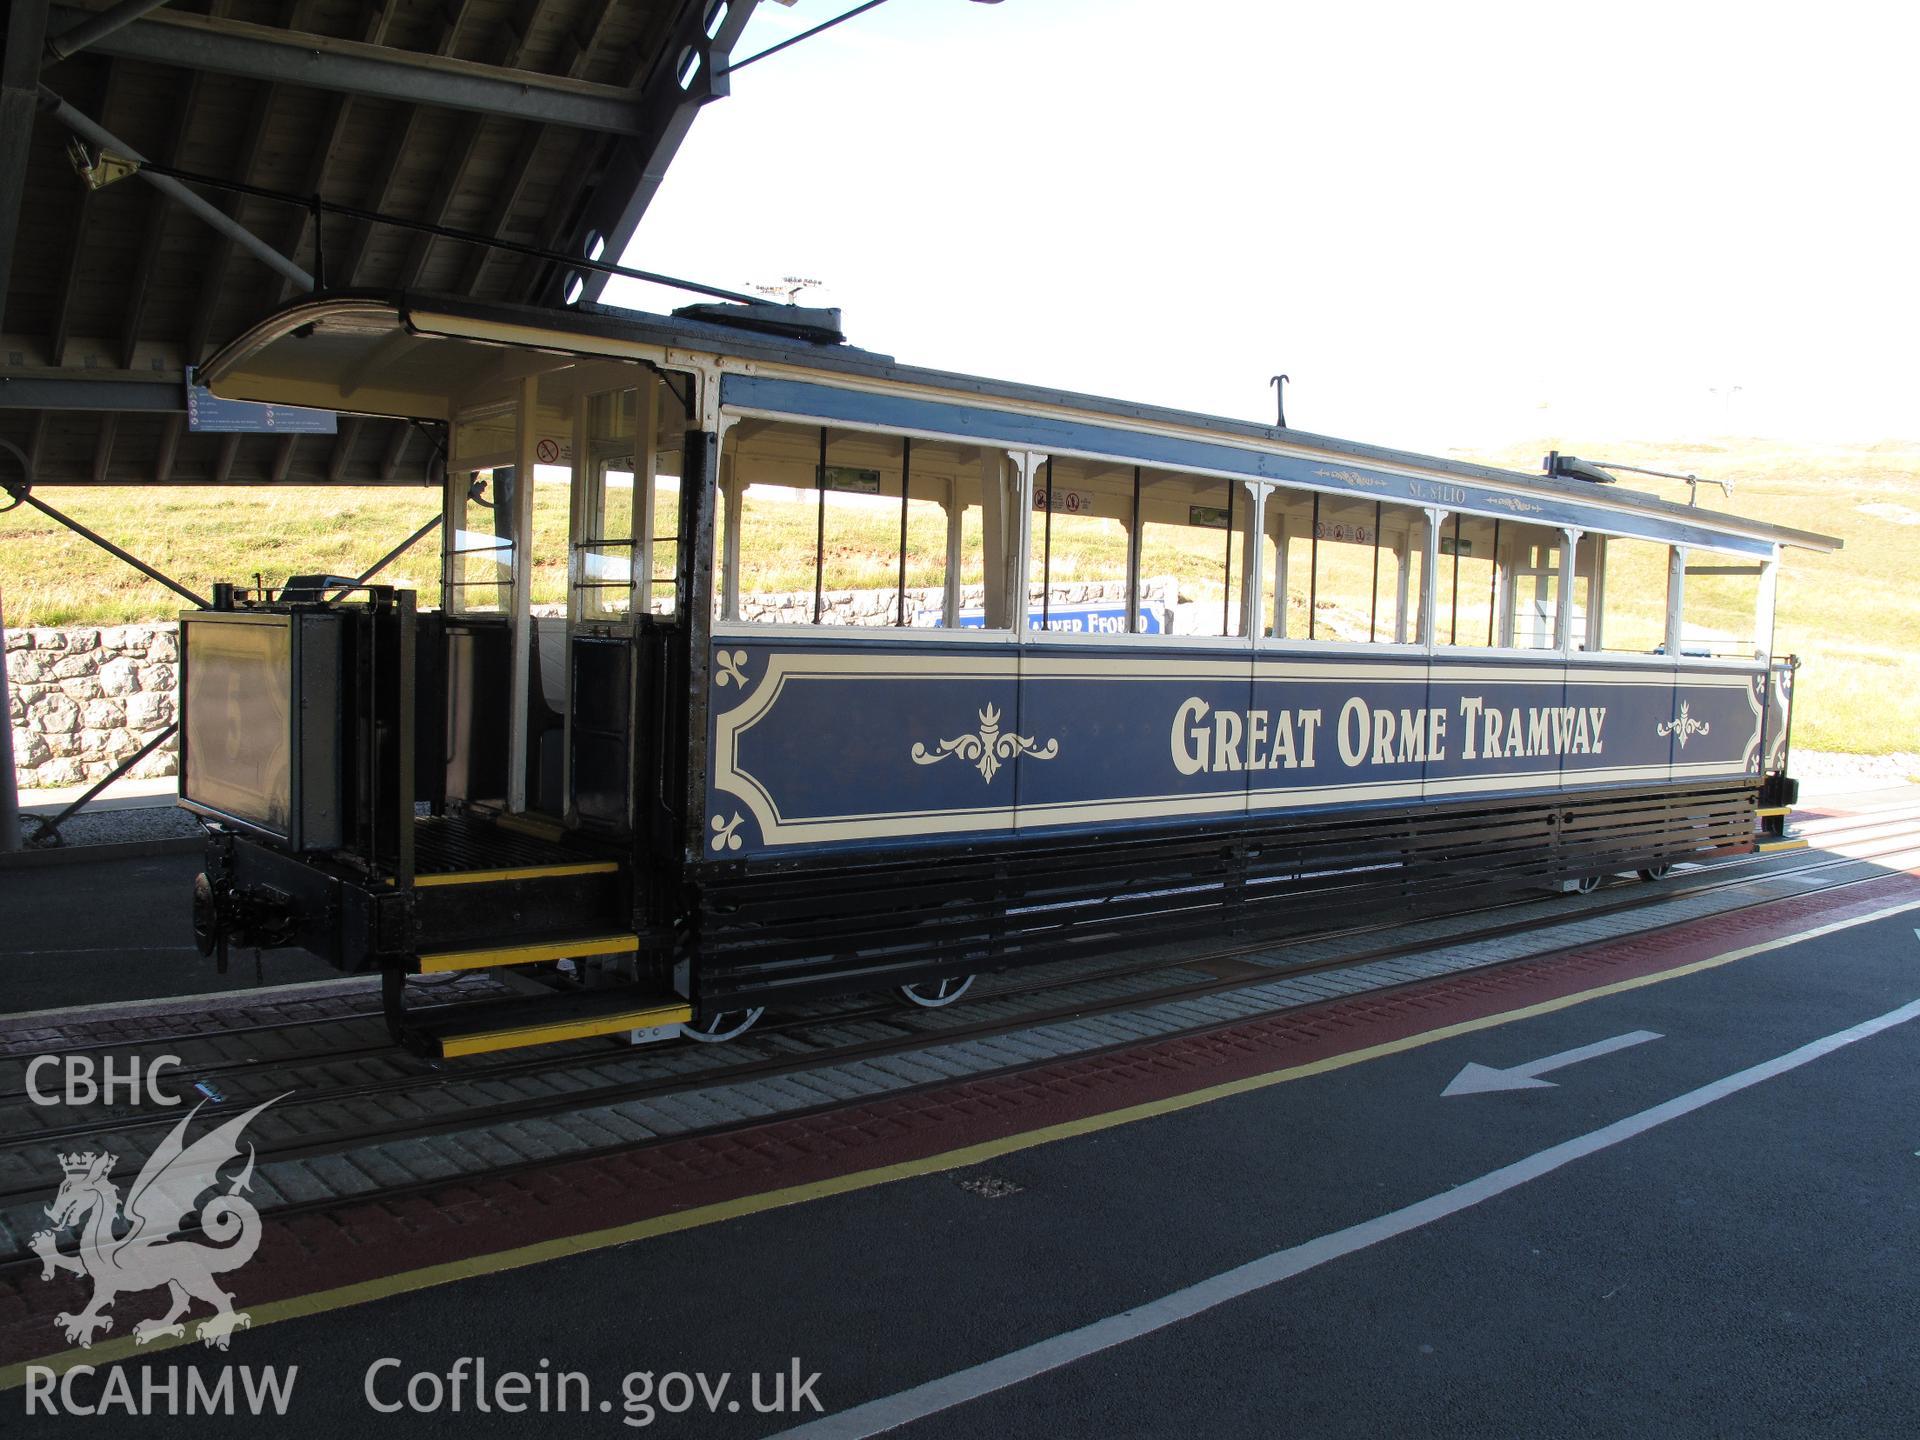 East (lower) end of Halfway Station, Great Orme Tramway, Llandudno, taken by Brian Malaws on 23 July 2011.